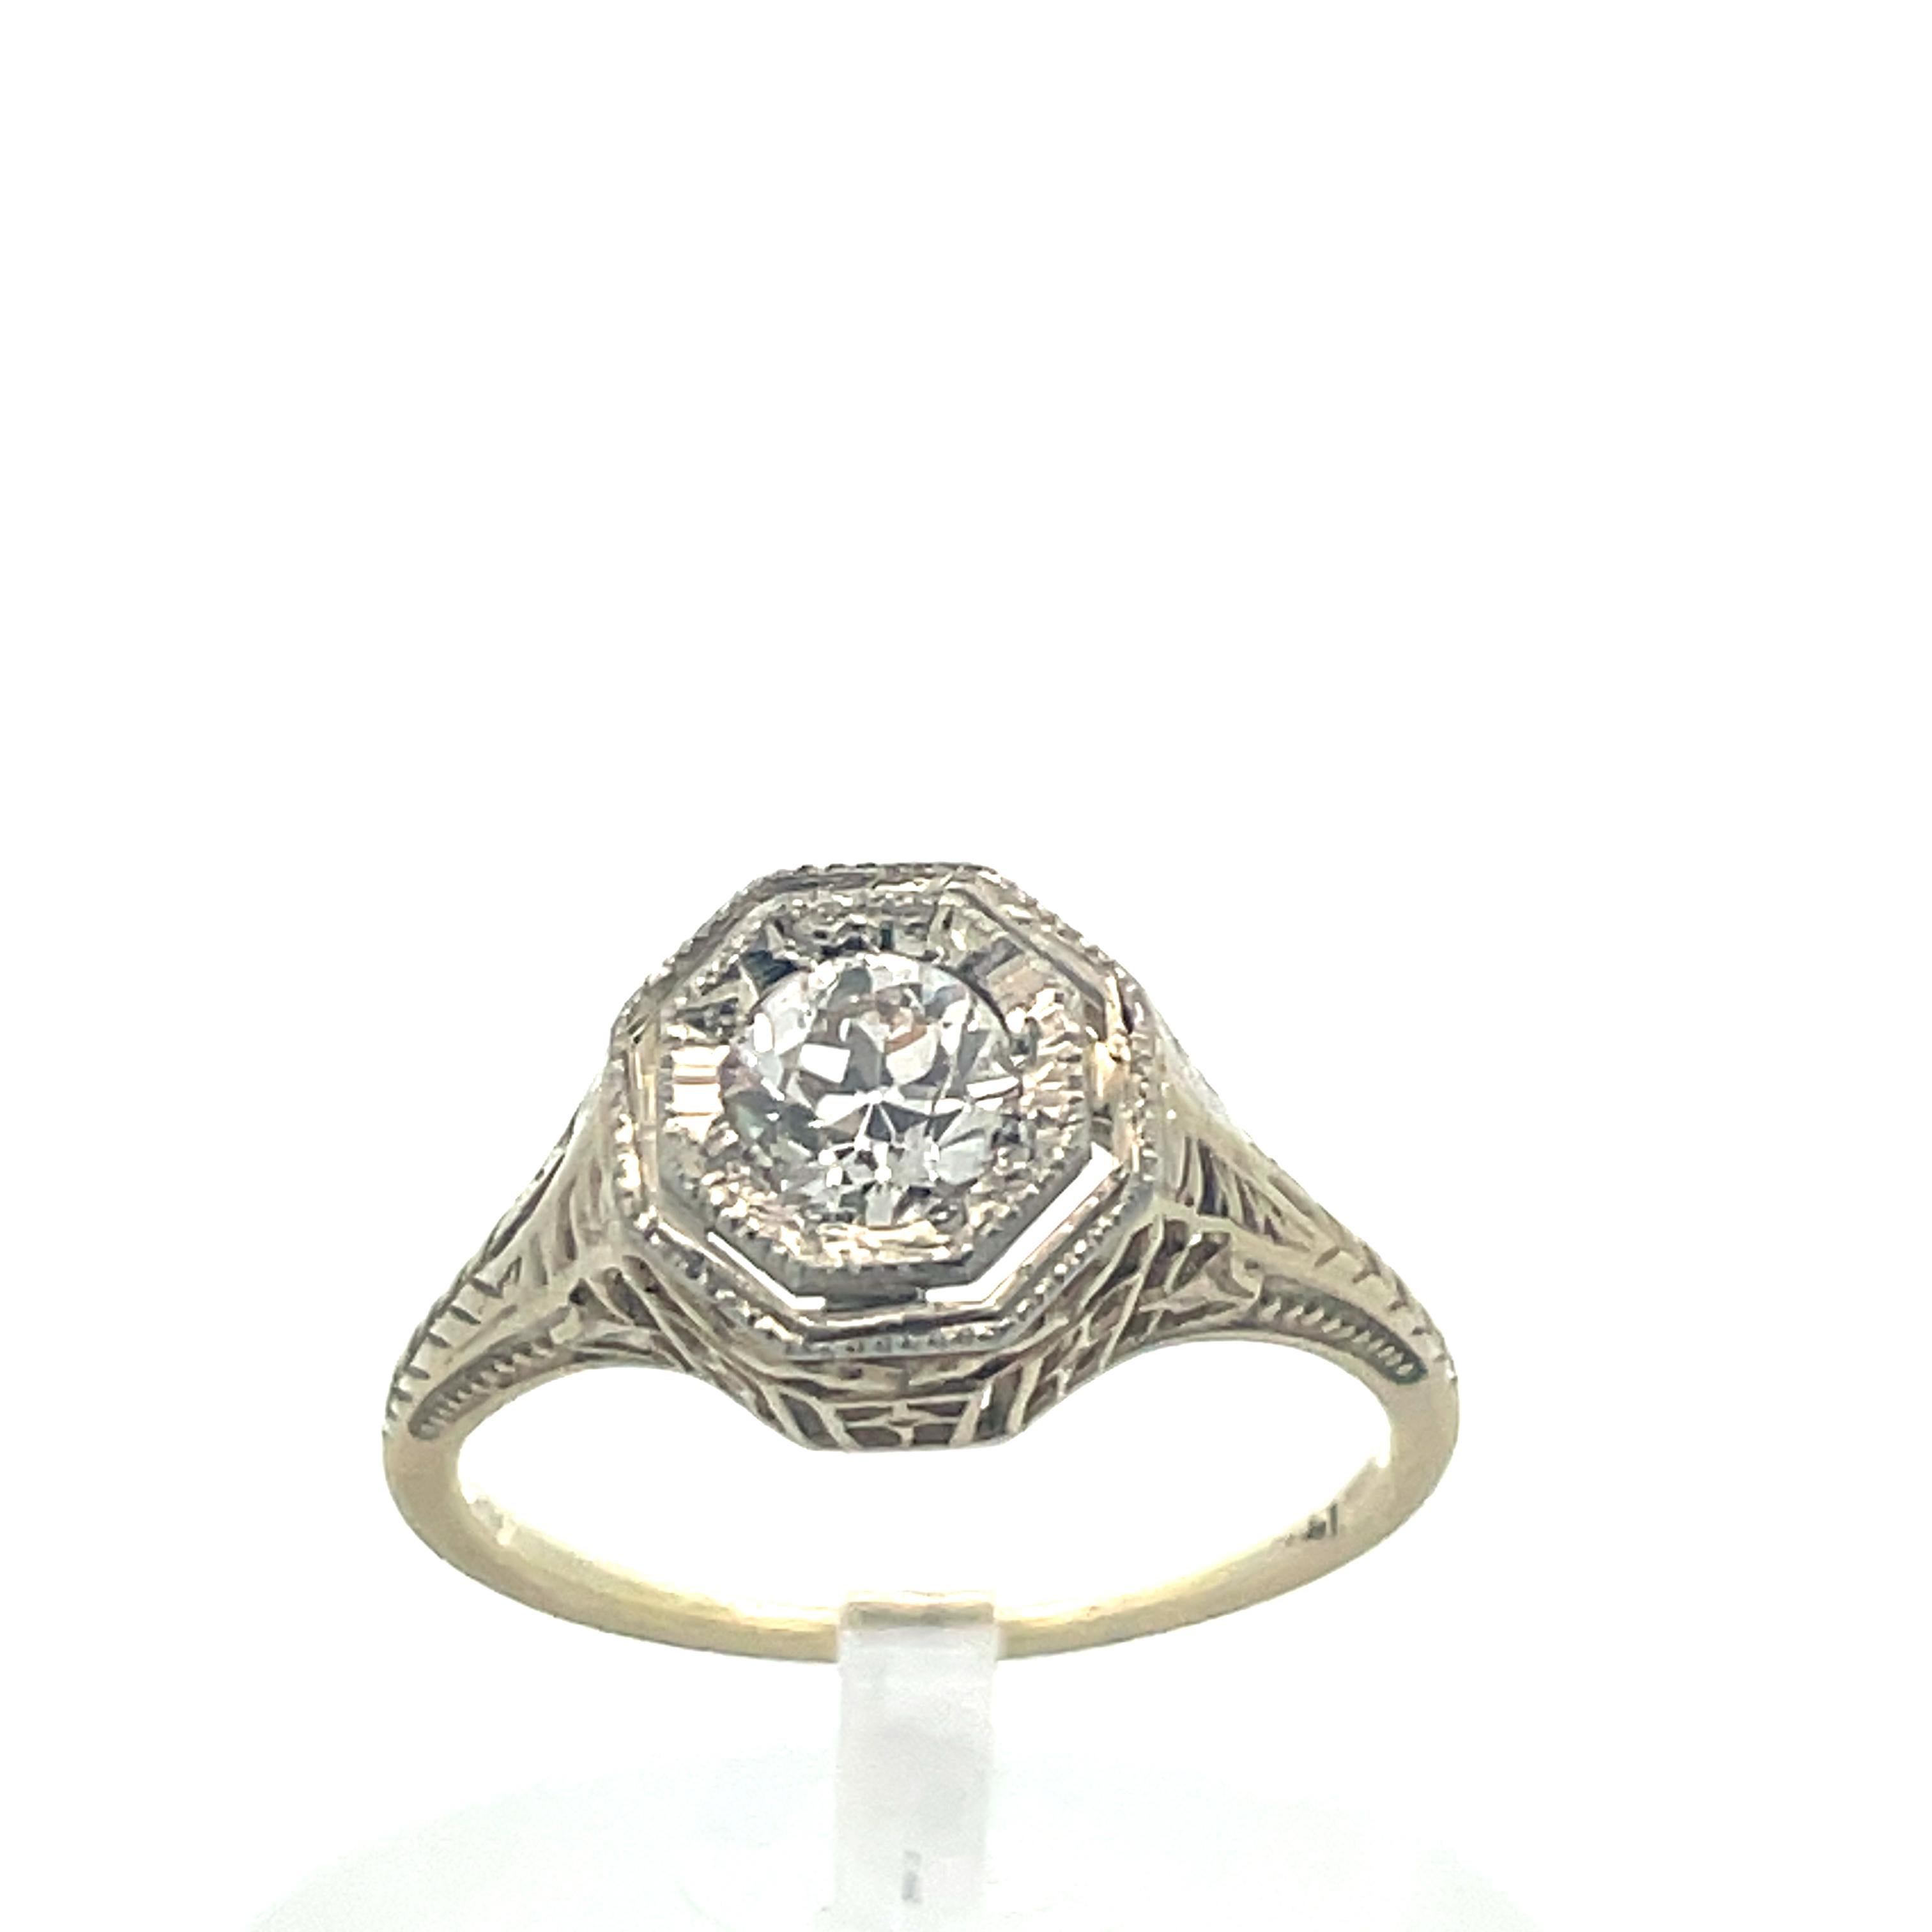 1920s 14k Yellow Gold and Platinum Filigree Diamond Ring 

- 14k yellow gold and platinum 
- .40 ct Euro cut SI1/SI2 Diamond 
- Size 5 

This is a stunning ring from the 1920s made from 14k yellow gold and platinum with a euro cut diamond. The band